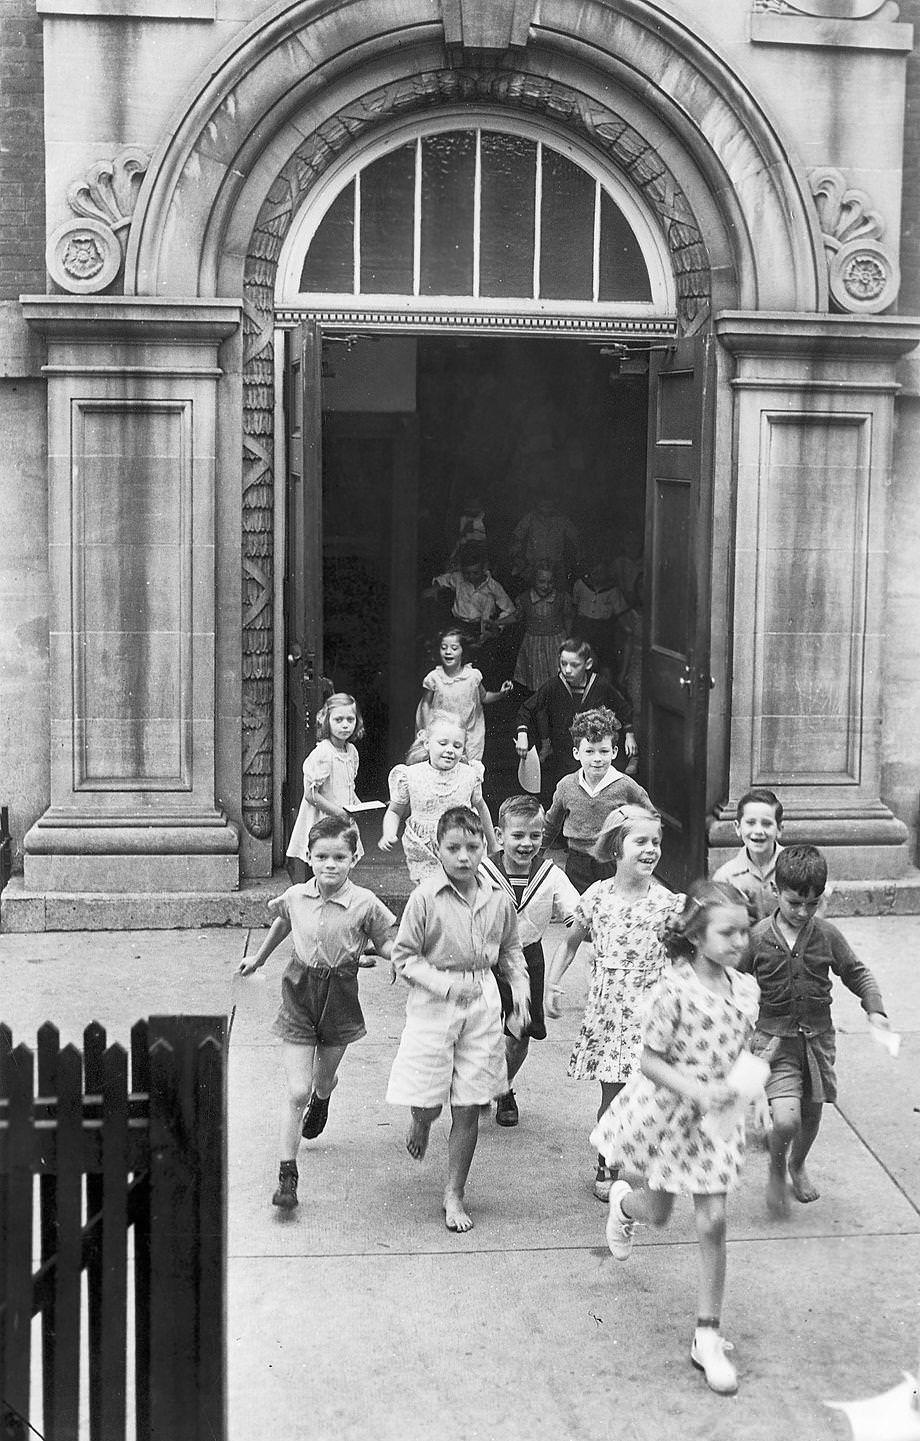 Students at the Grace Arents School celebrated the end of the school year, 1943.